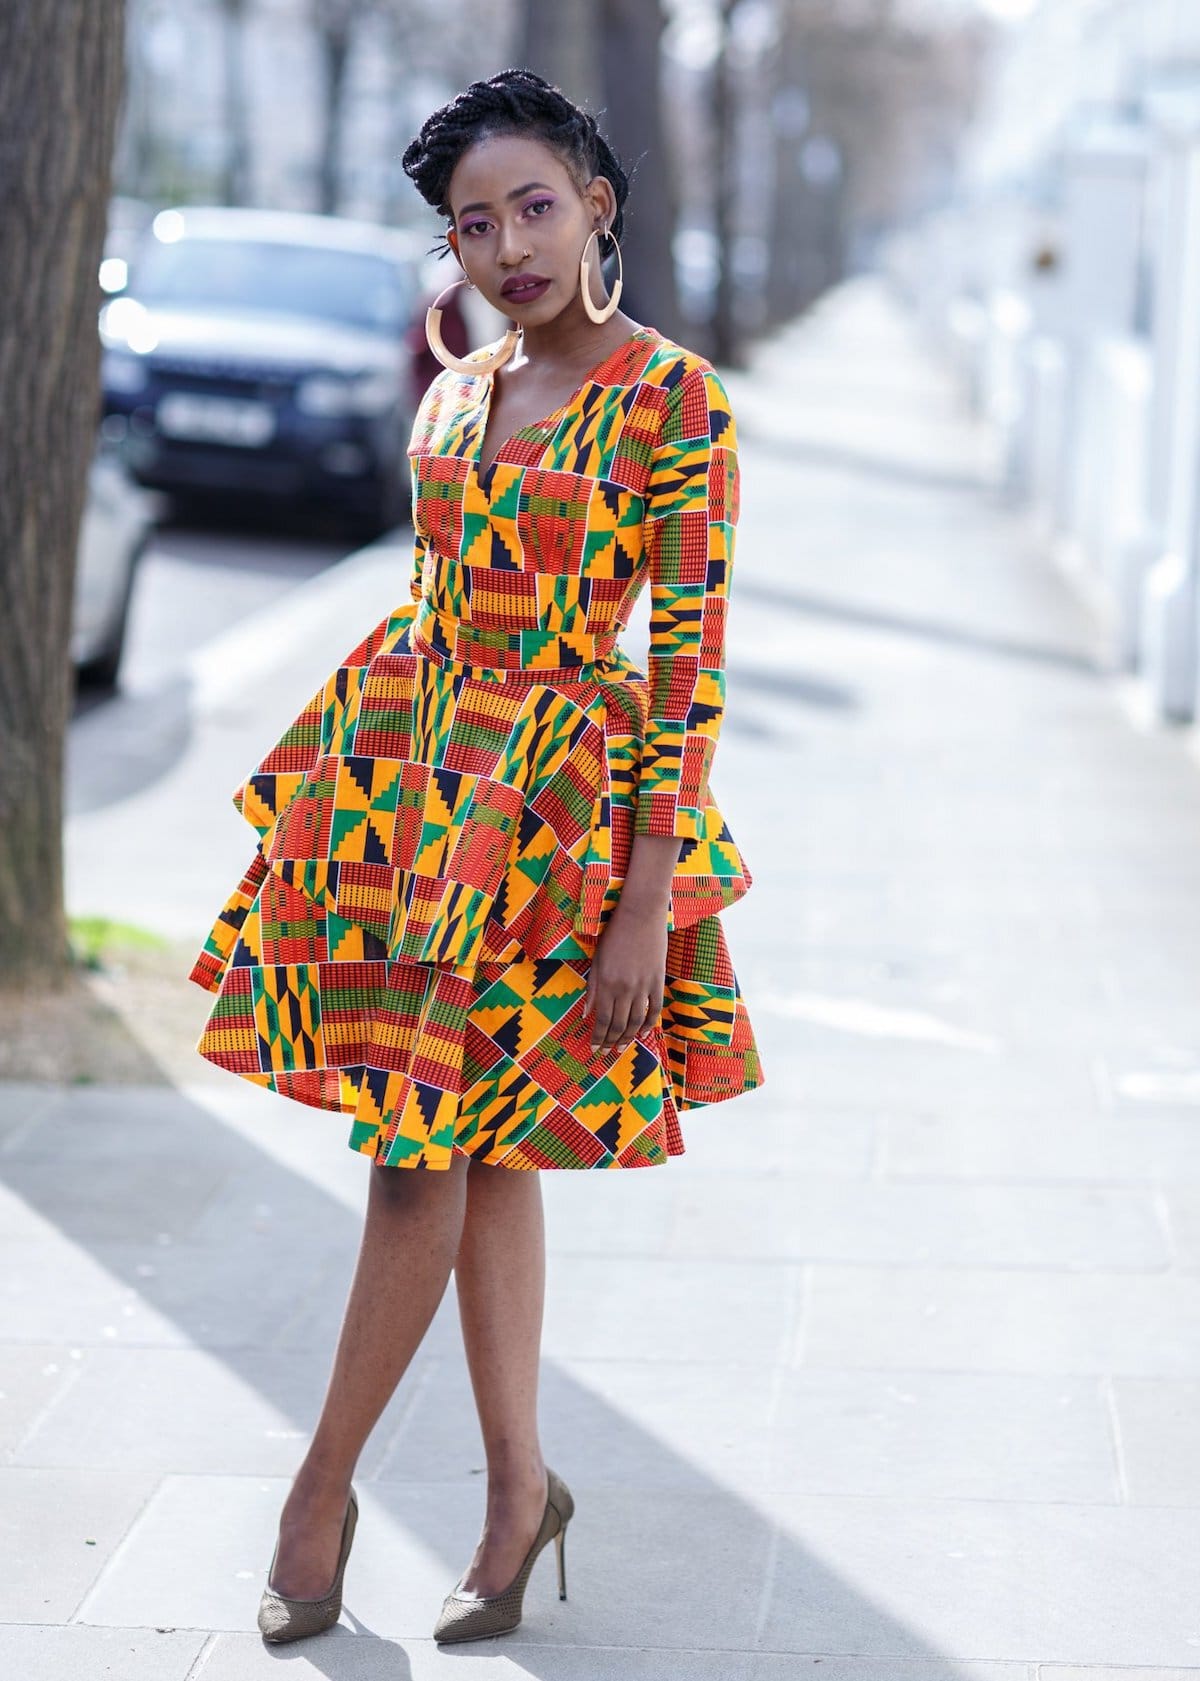 Who would have thought that African print clothes would look this good? Check out this stunning ankara print dress from this phenomenal designer. From ankara Dutch wax, Kente, to Kitenge and Dashiki. All your favorite styles in one place (+find out where to get them). Click to see all! Ankara, Dutch wax, Kente, Kitenge, Dashiki, African print dress, African fashion, African women dresses, African prints, Nigerian style, Ghanaian fashion, Senegal fashion, Kenya fashion, Nigerian fashion #africanprint #ankarastyles #africanfashion